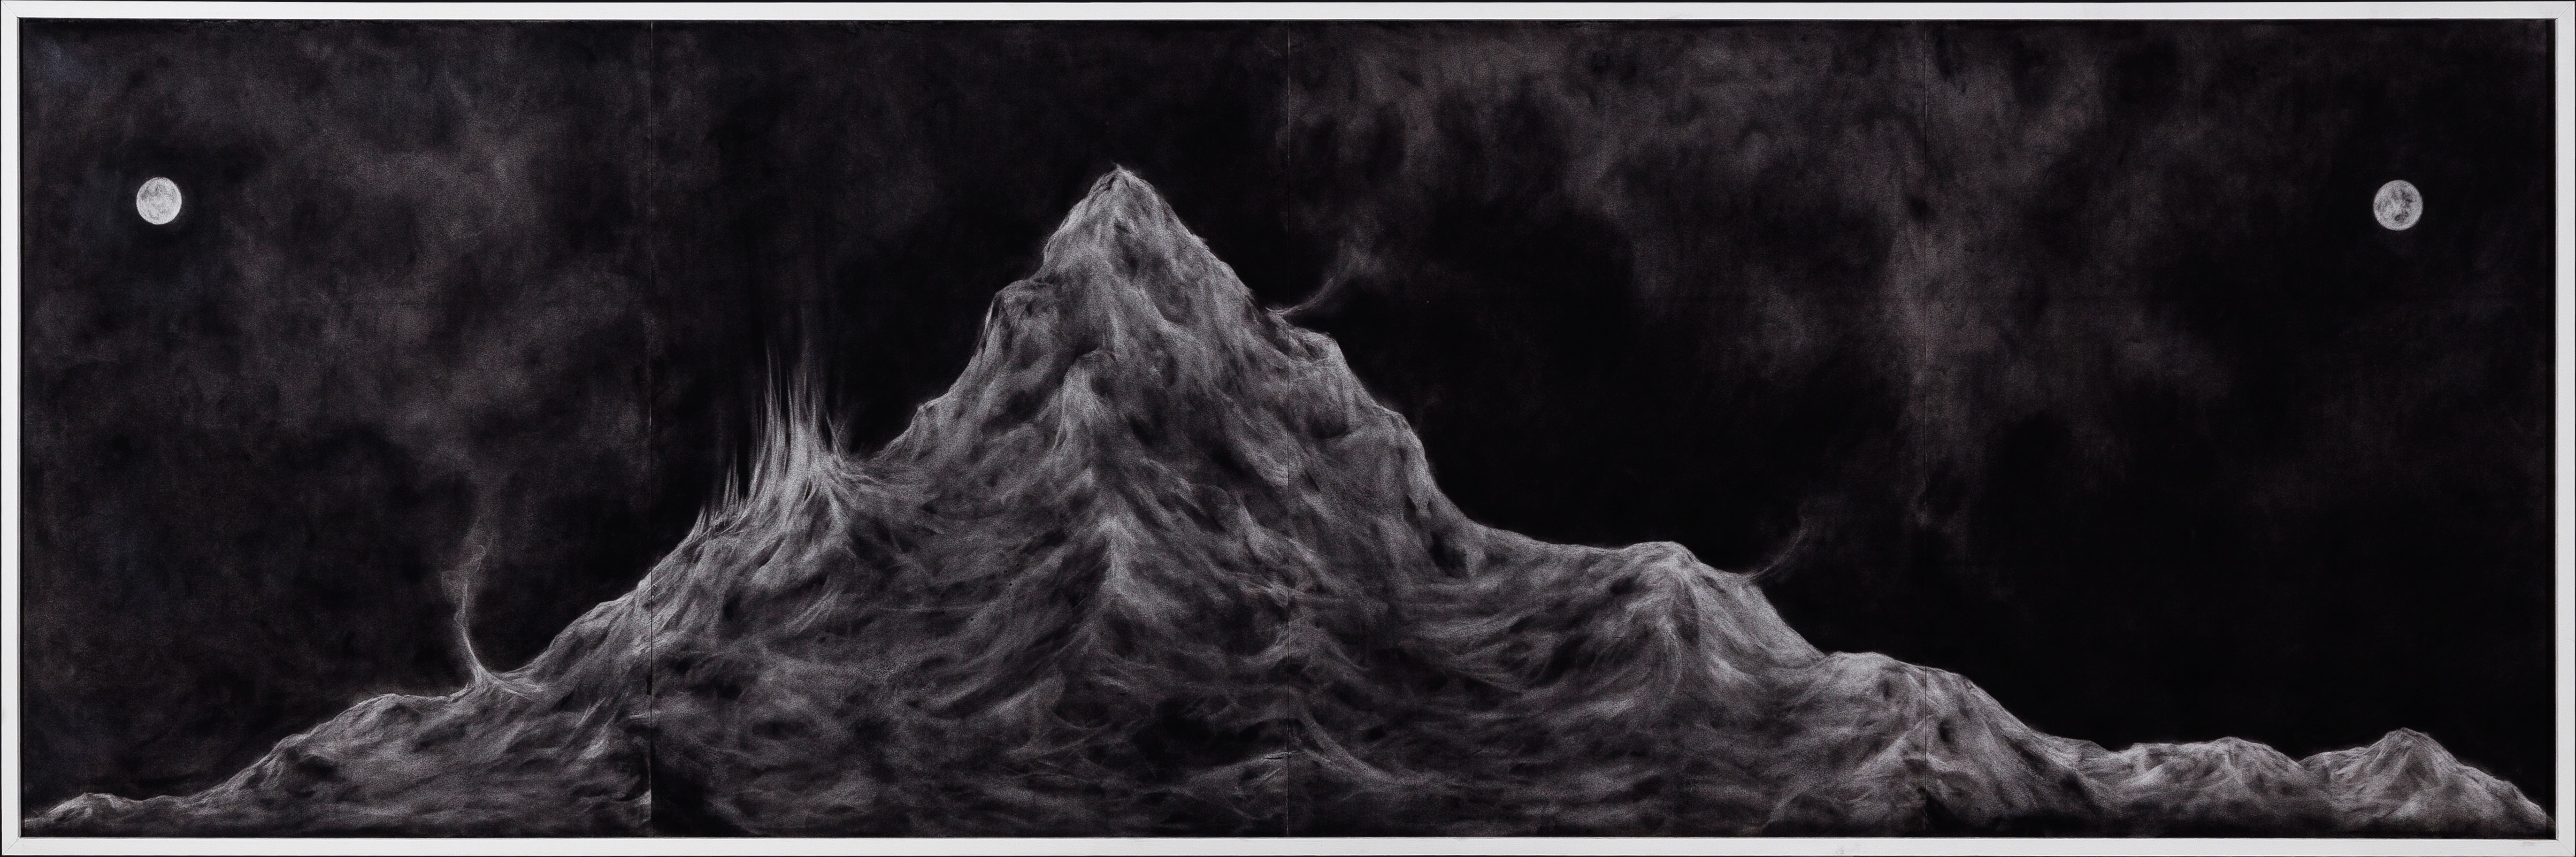 Minam Apang |Untitled | 2014 |Moon Mirrors Mountains Series | Charcoal on paper | 25 x 78 in.